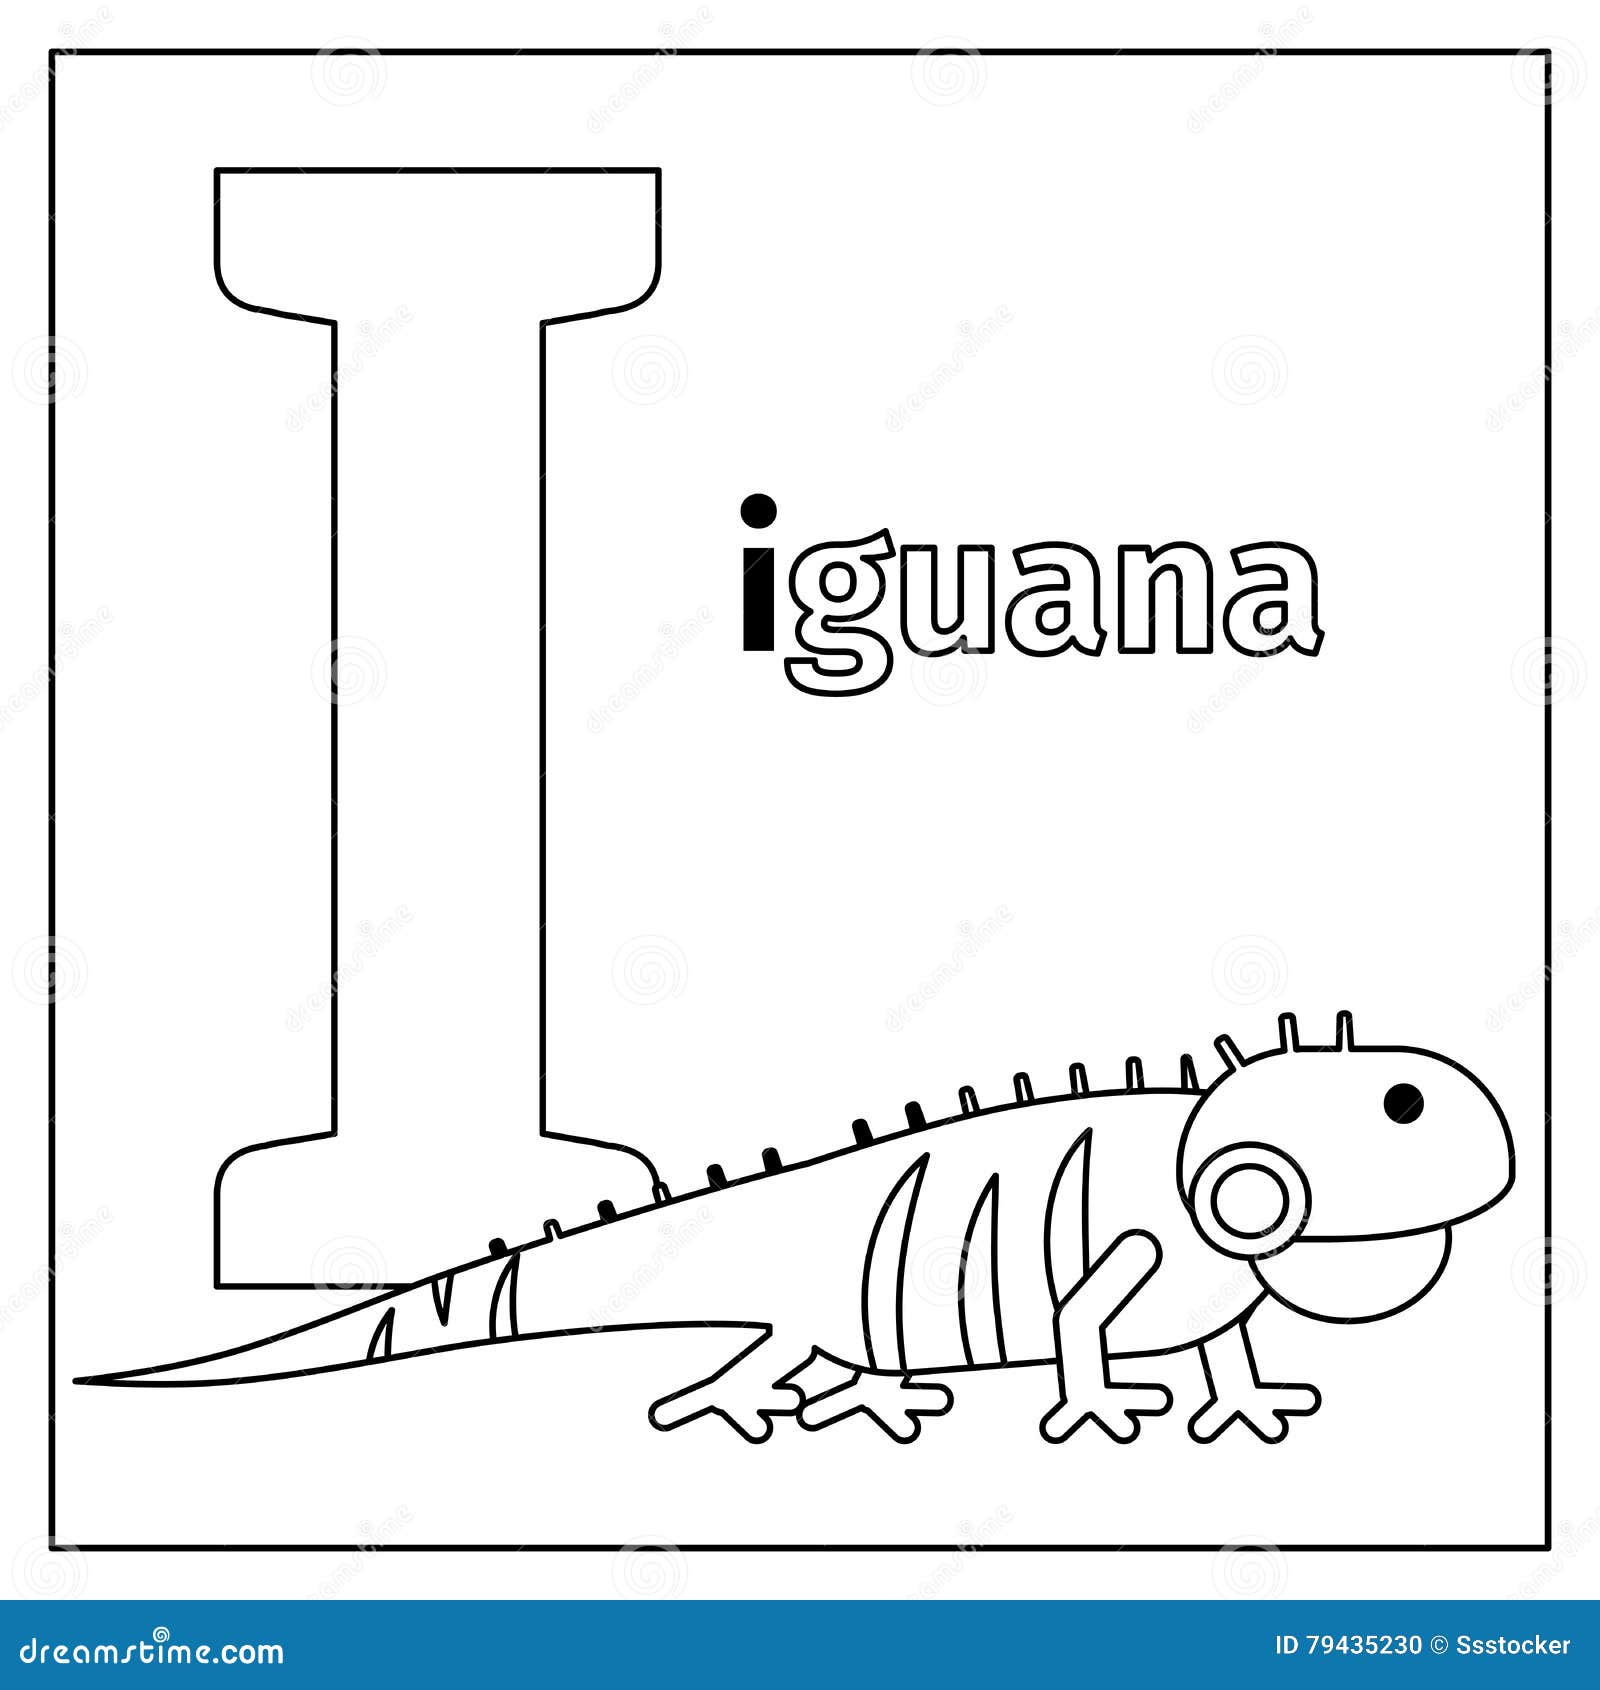 Download Iguana, Letter I Coloring Page Stock Vector - Illustration of character, color: 79435230